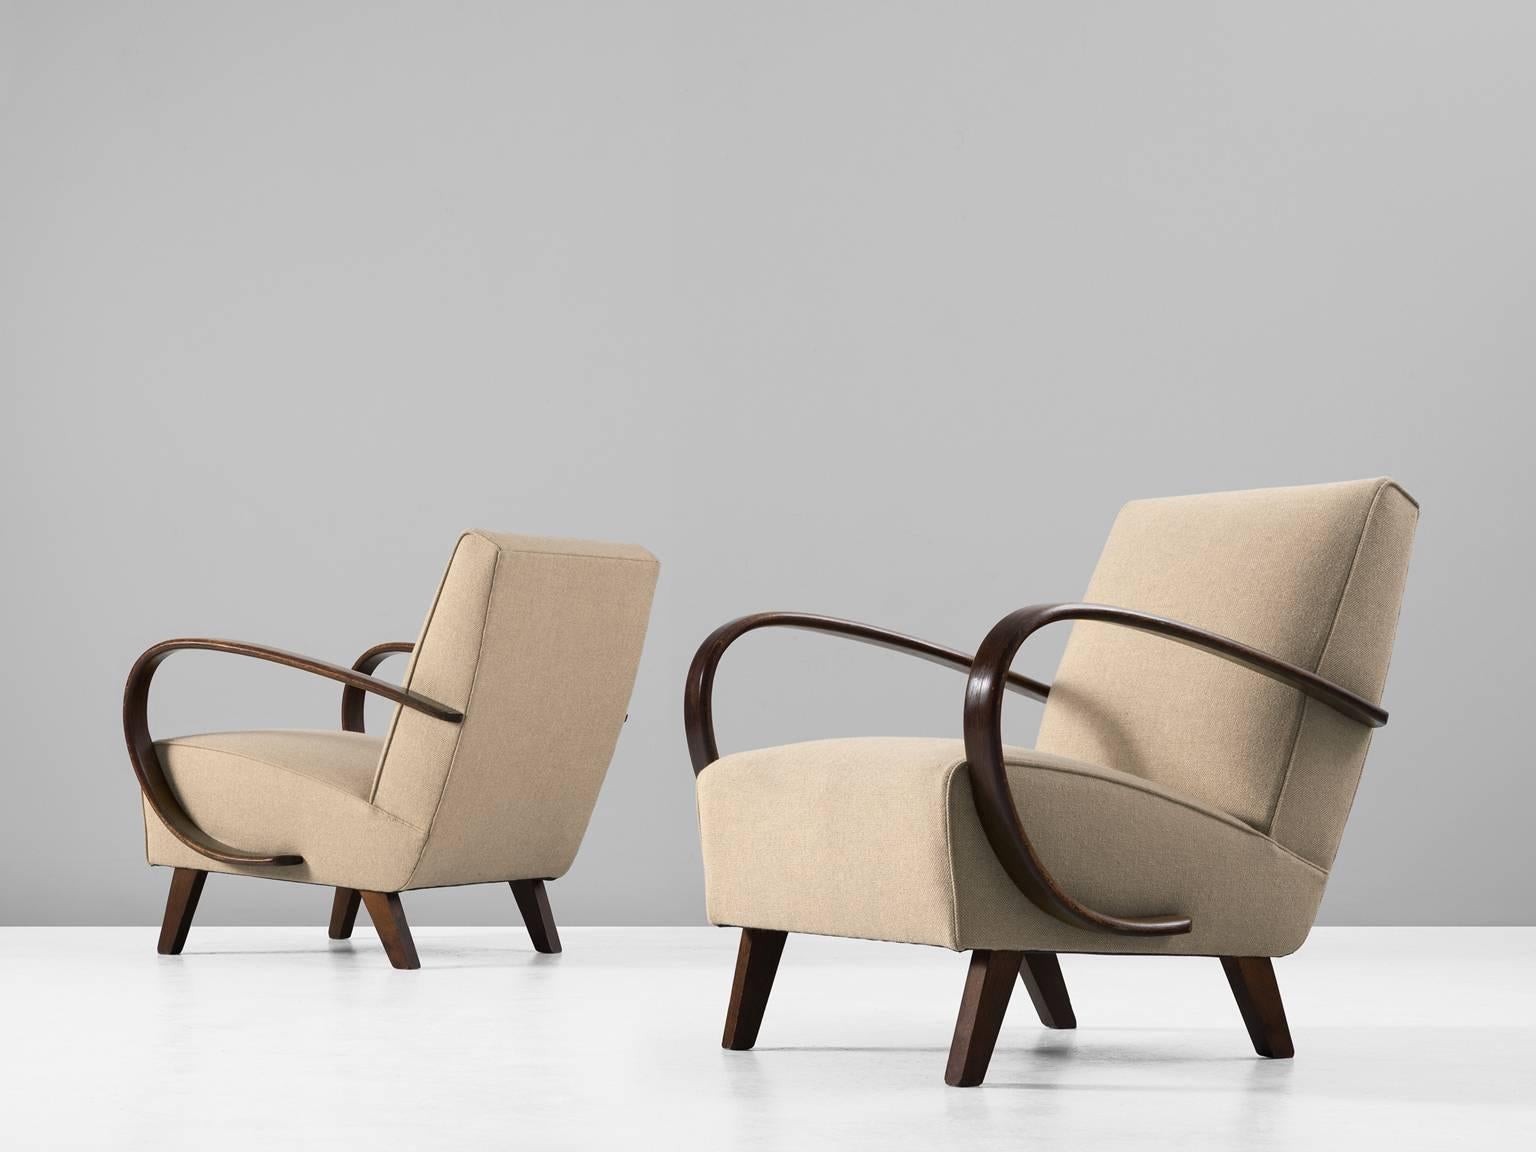 Pair of armchairs, in beech and fabric, by Jindrich Halabala, Czech Republic 1930s.

 Dynamic armchairs with beautiful fluent armrests. The four tapered legs provide a nice open look. The dark brown stained wood nicely blends with the beige woolen